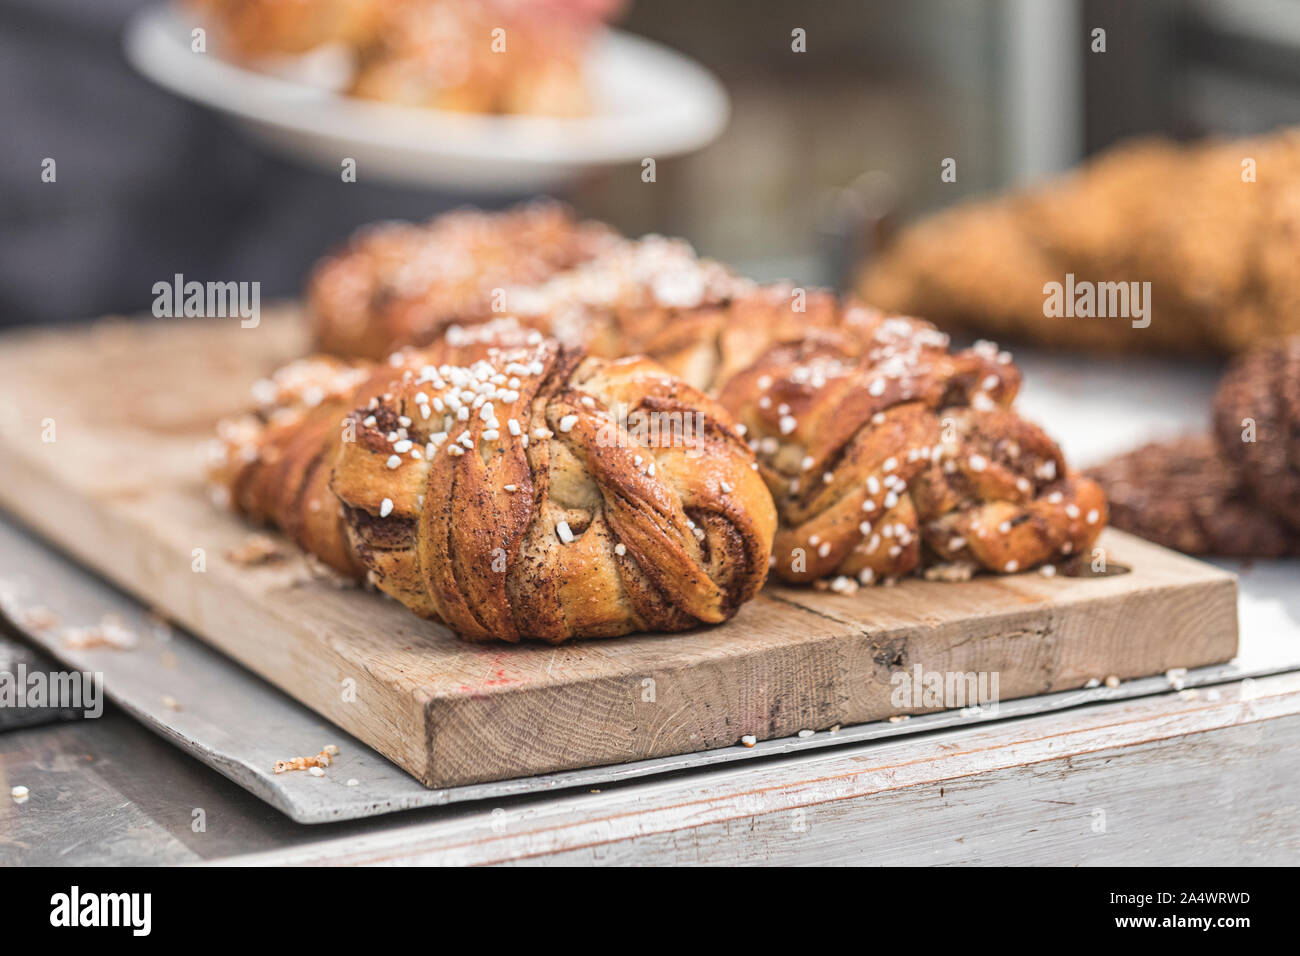 Twisted traditional Swedish cinnamon rolls  at a café. The sweet buns are on a wooden chopping board. Stock Photo